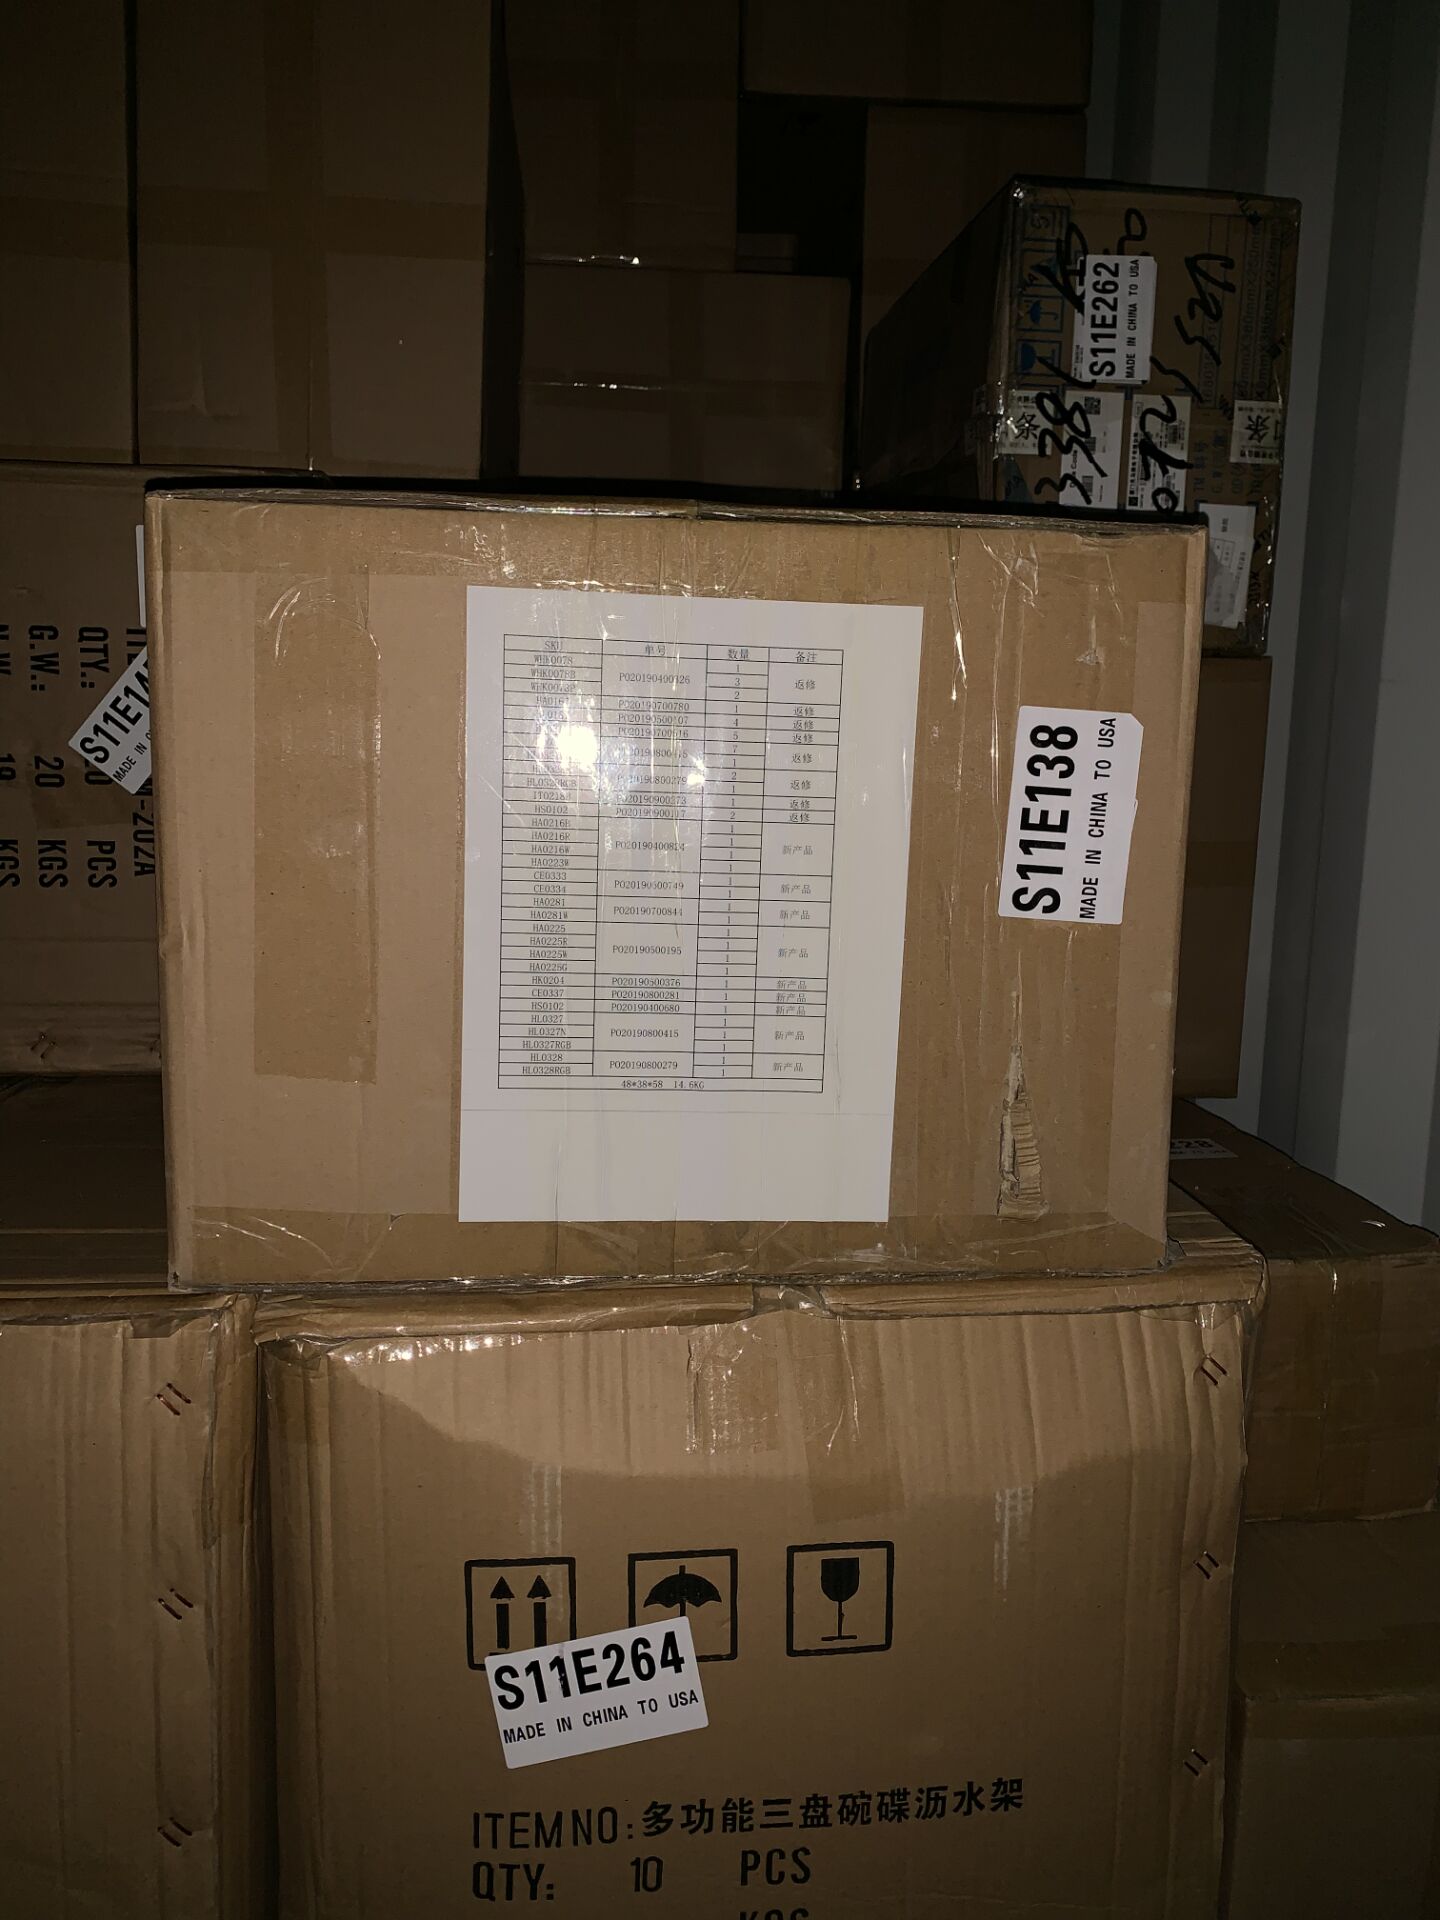 TV PARTS shipping from China to LA